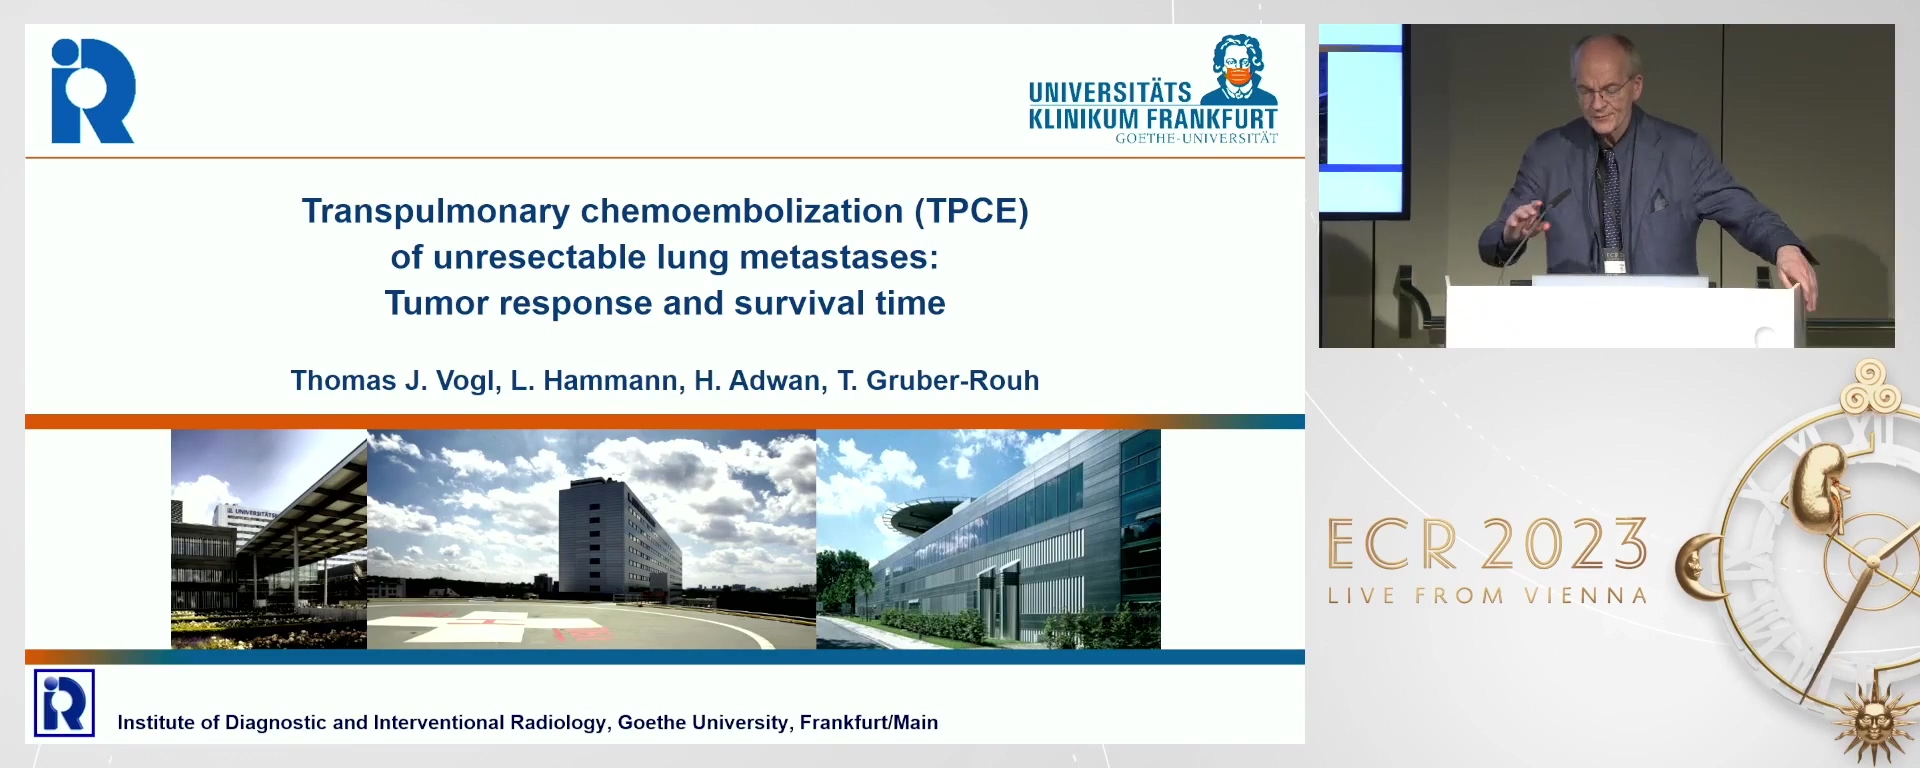 Transpulmonary chemoembolisation (TPCE) of unresectable lung metastases: tumour response and survival time